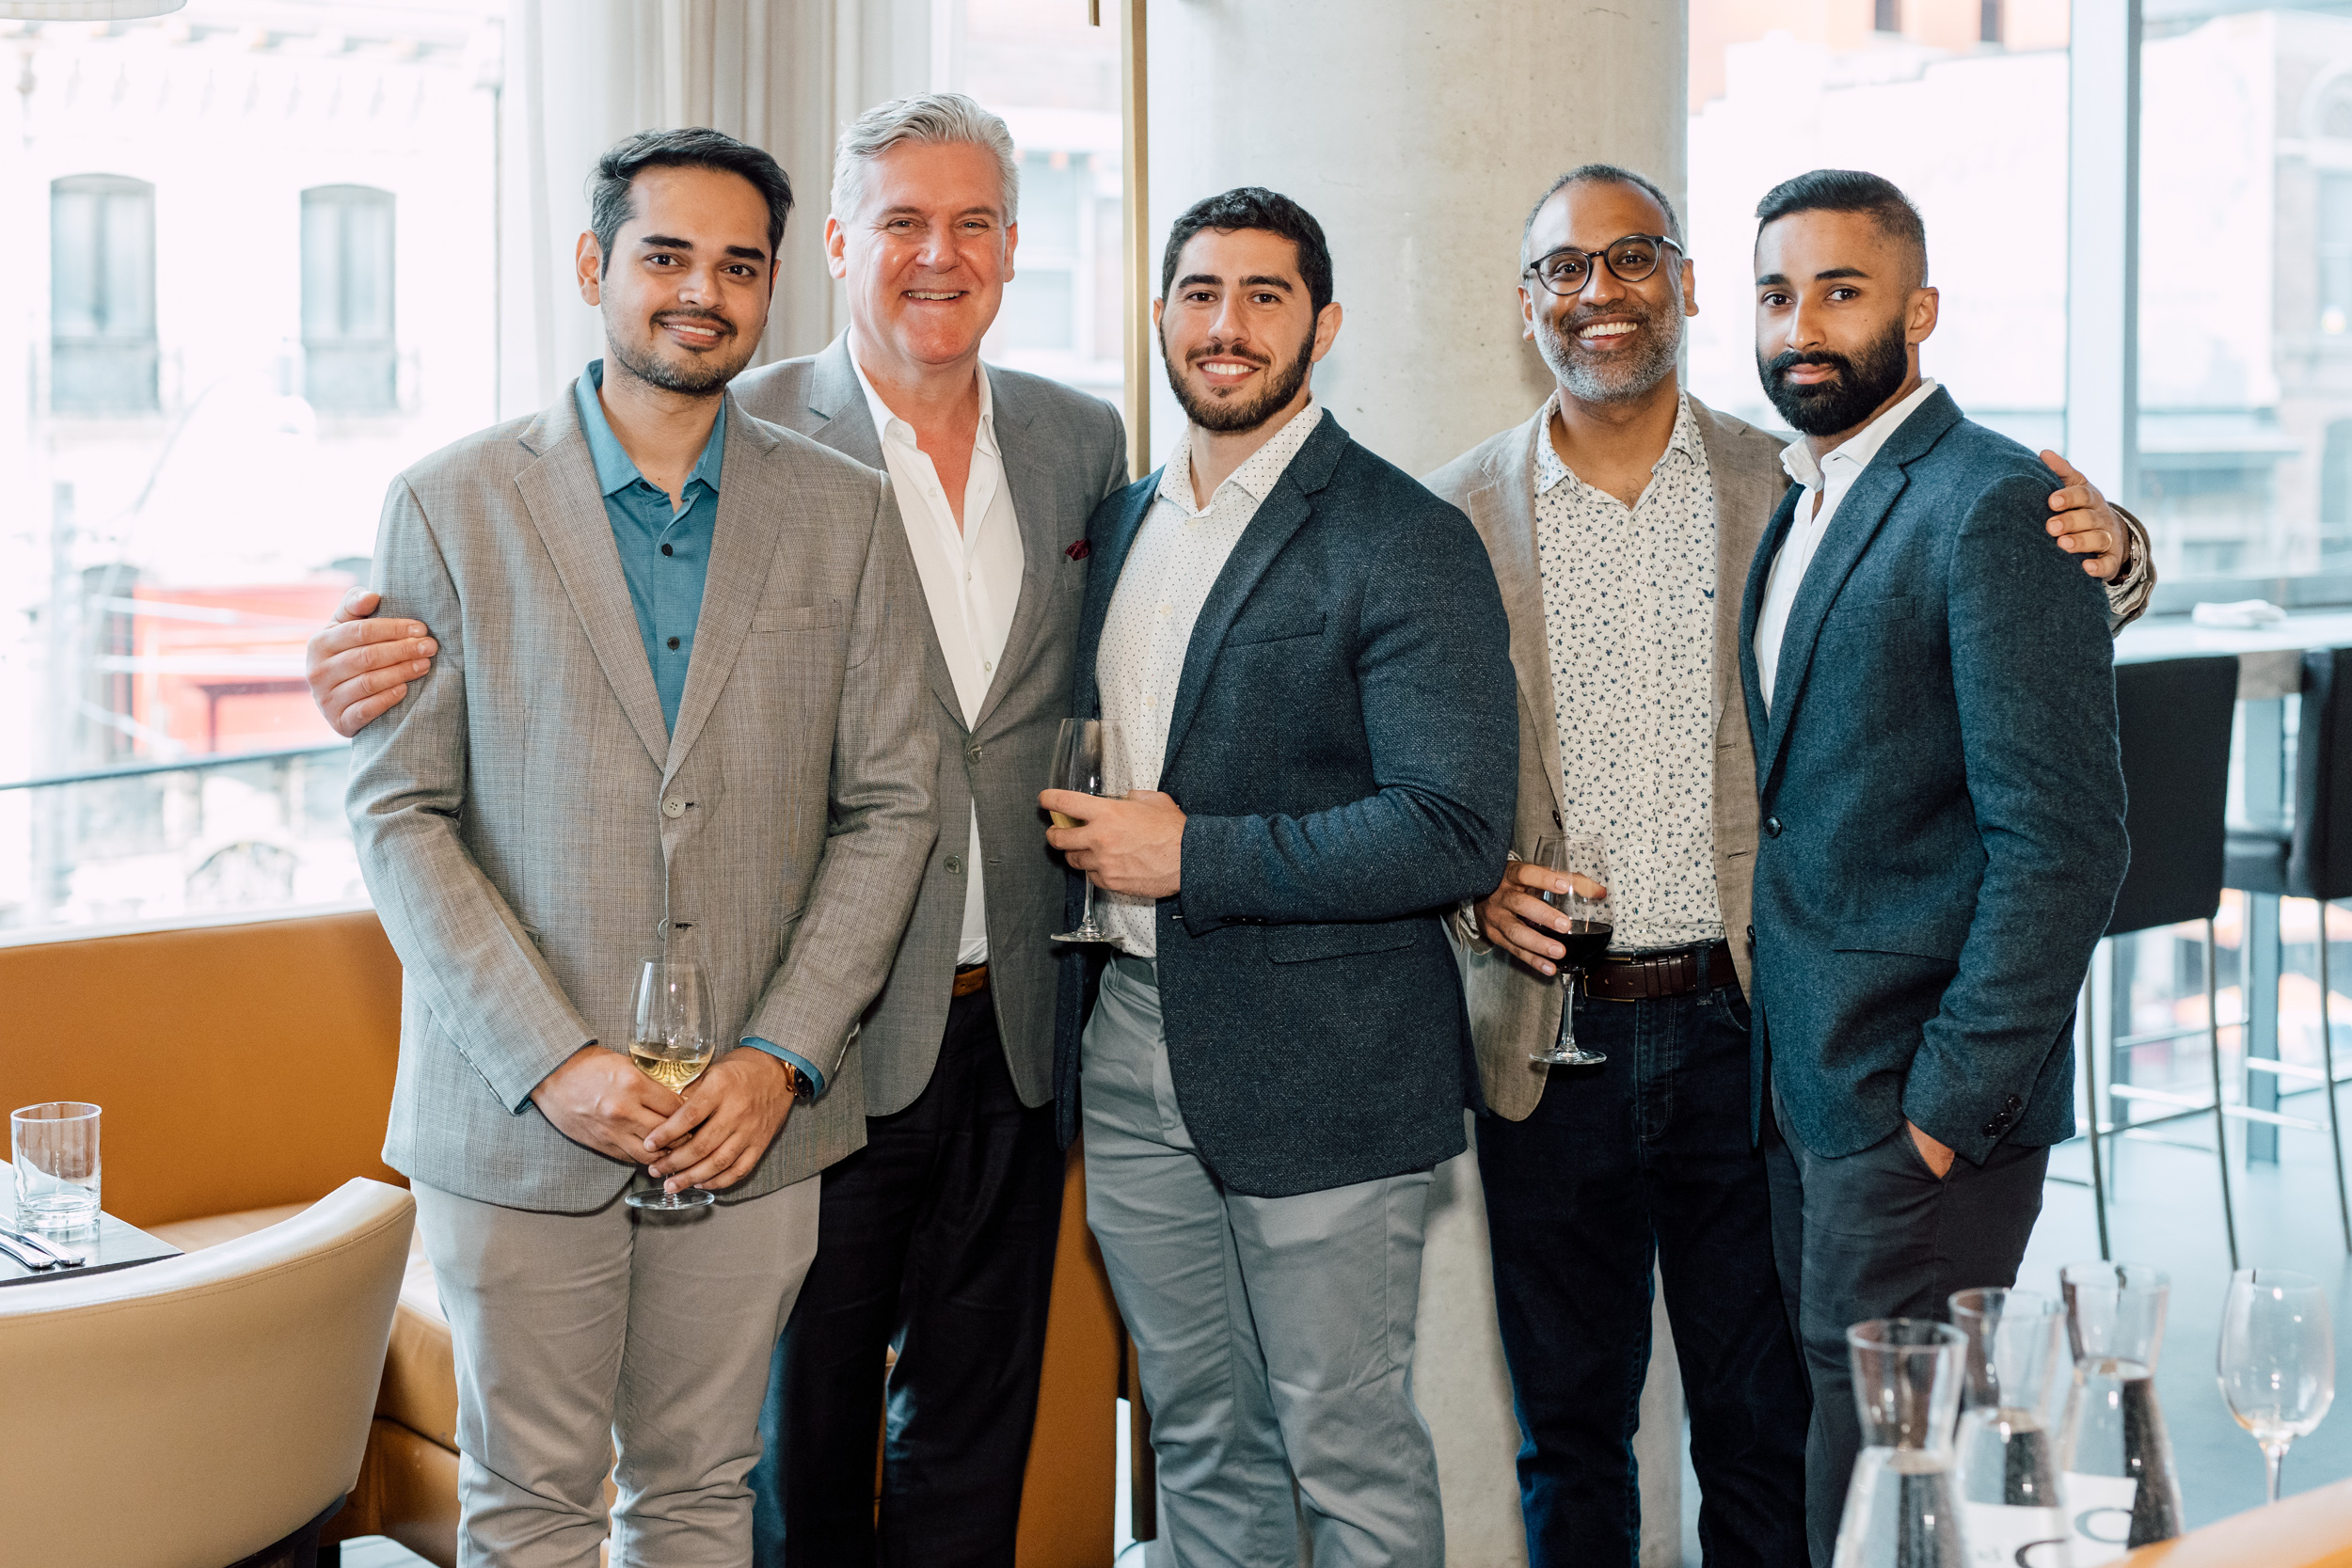 A group of men posing for a graduation event photo in a restaurant.